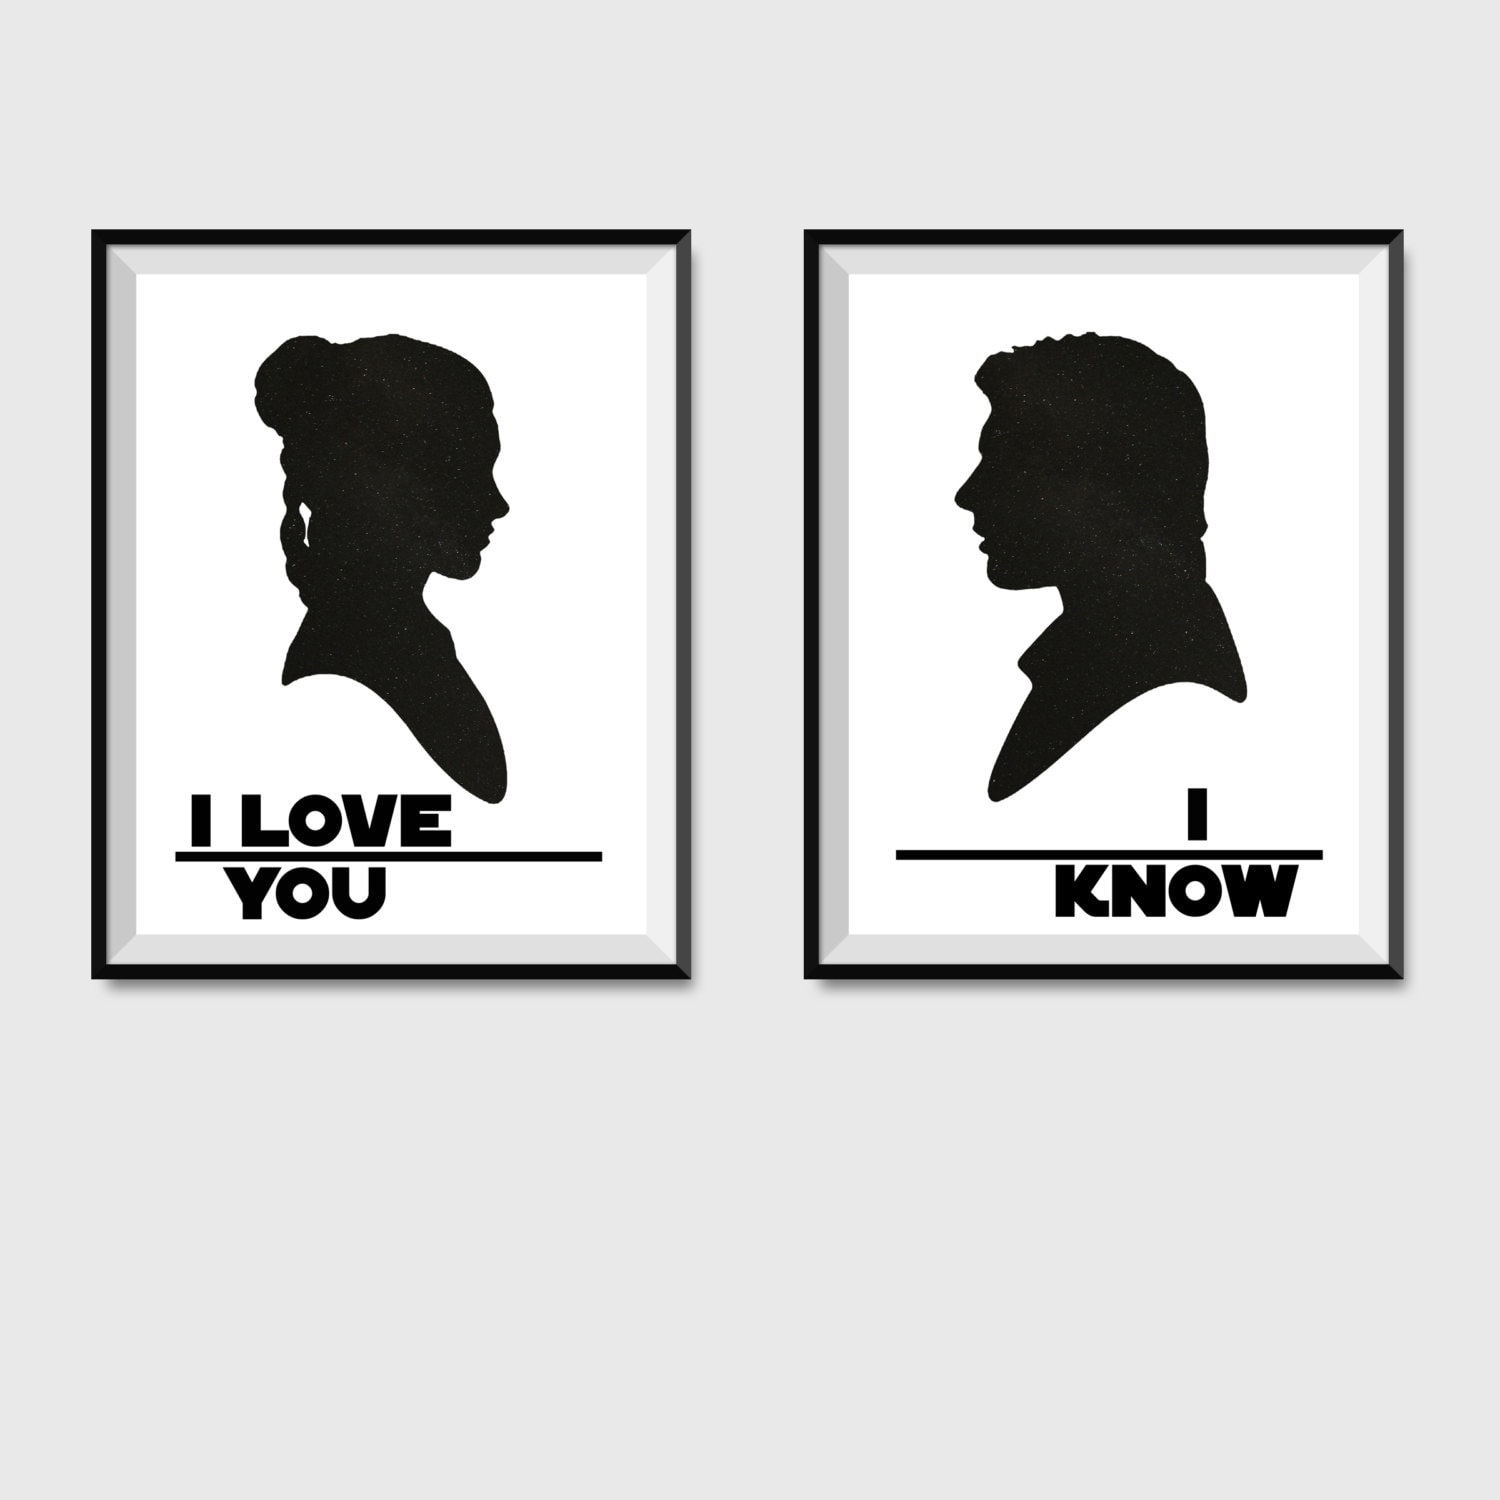 Two Star Wars branded espresso cups. One with Princess Leia saying I love  you and the other with Han Solo saying I know. On wooden bench top Stock  Photo - Alamy